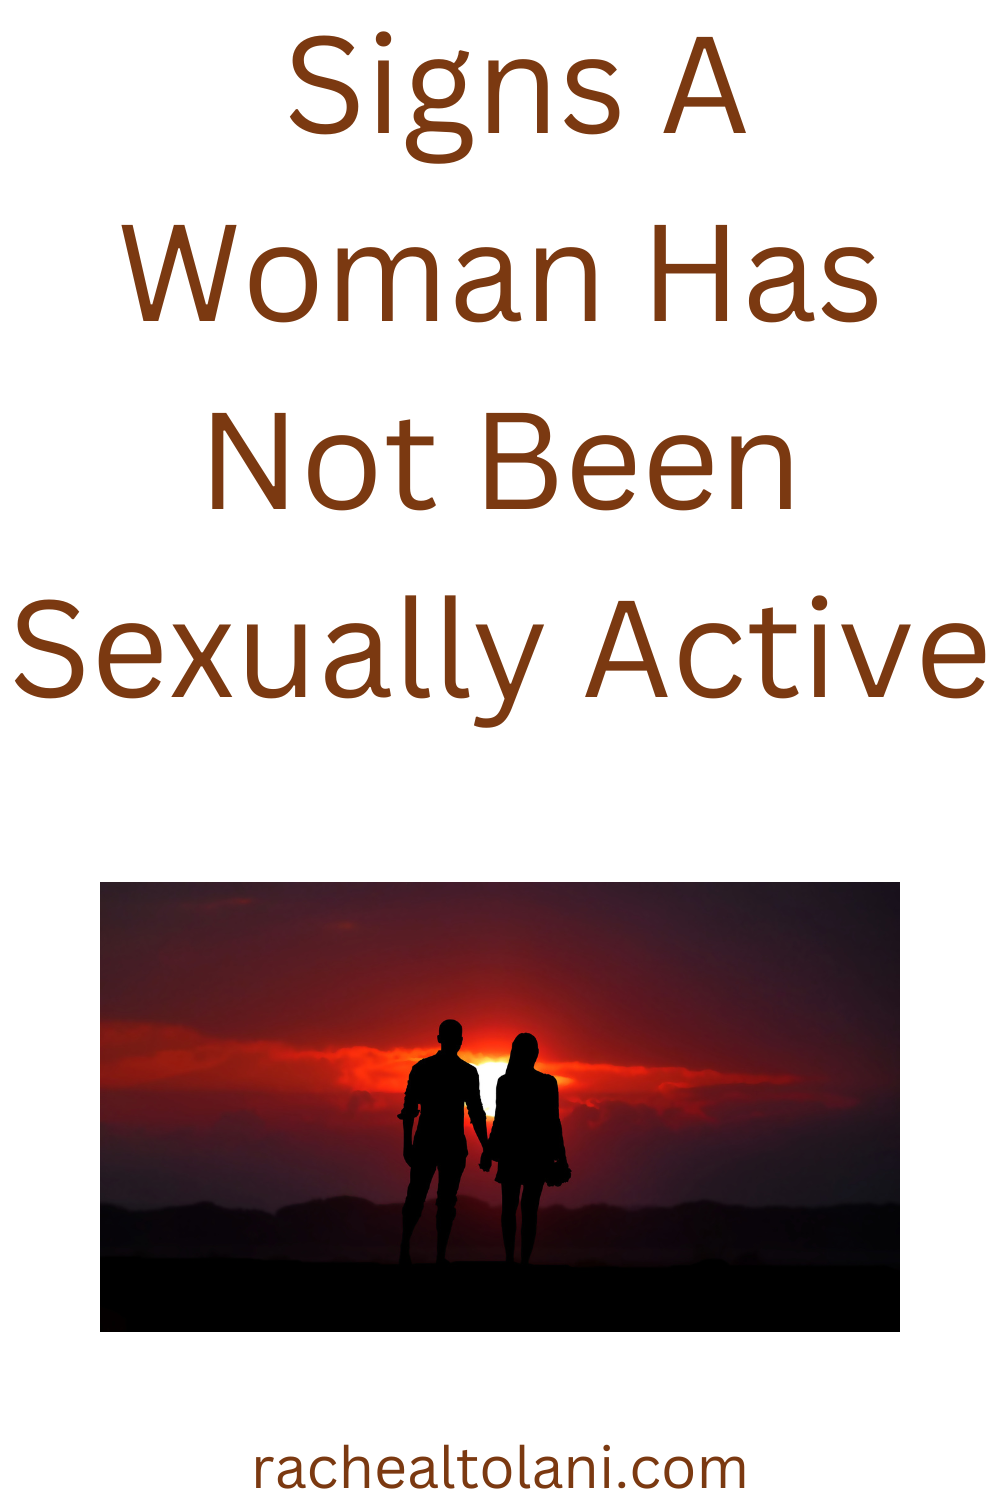 Signs a woman has not been sexually active